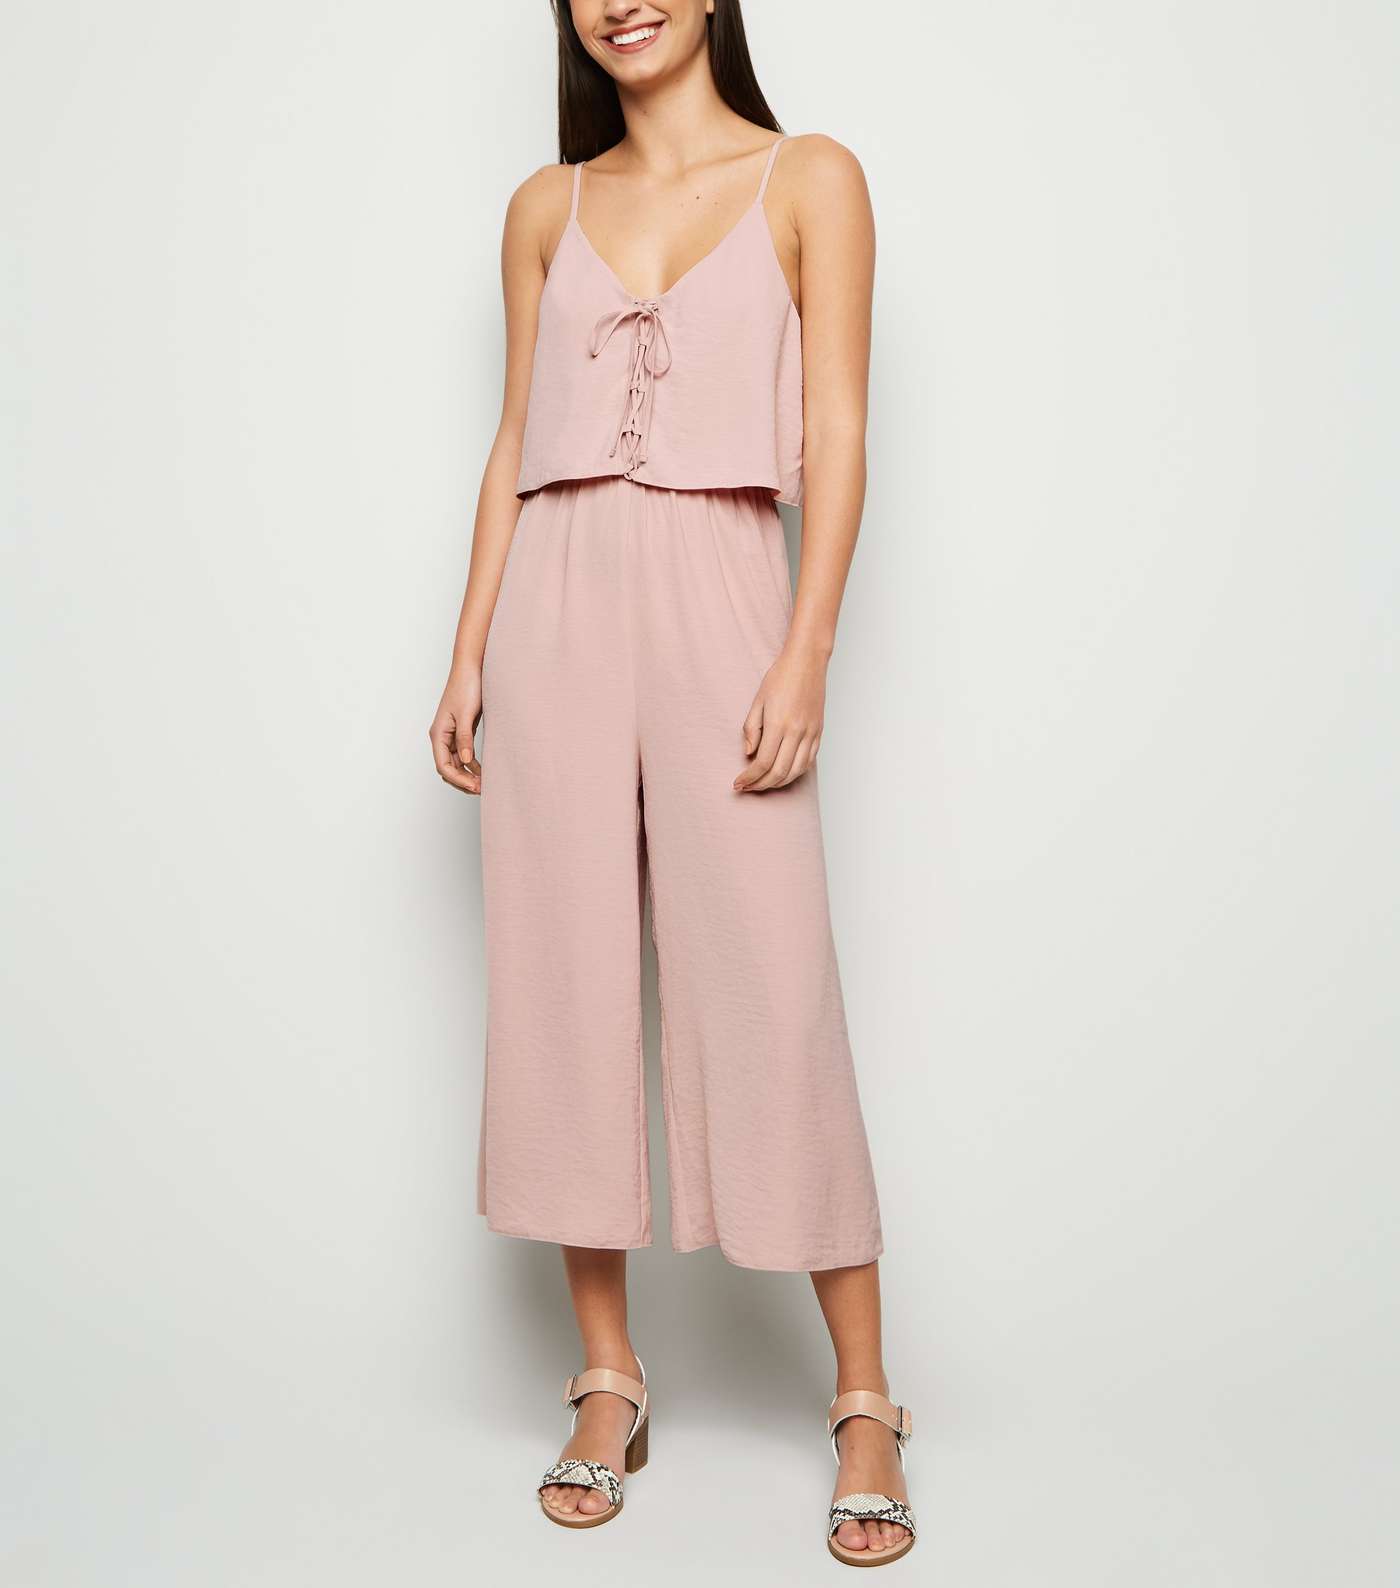 Pink Lace Up Layered Culotte Jumpsuit